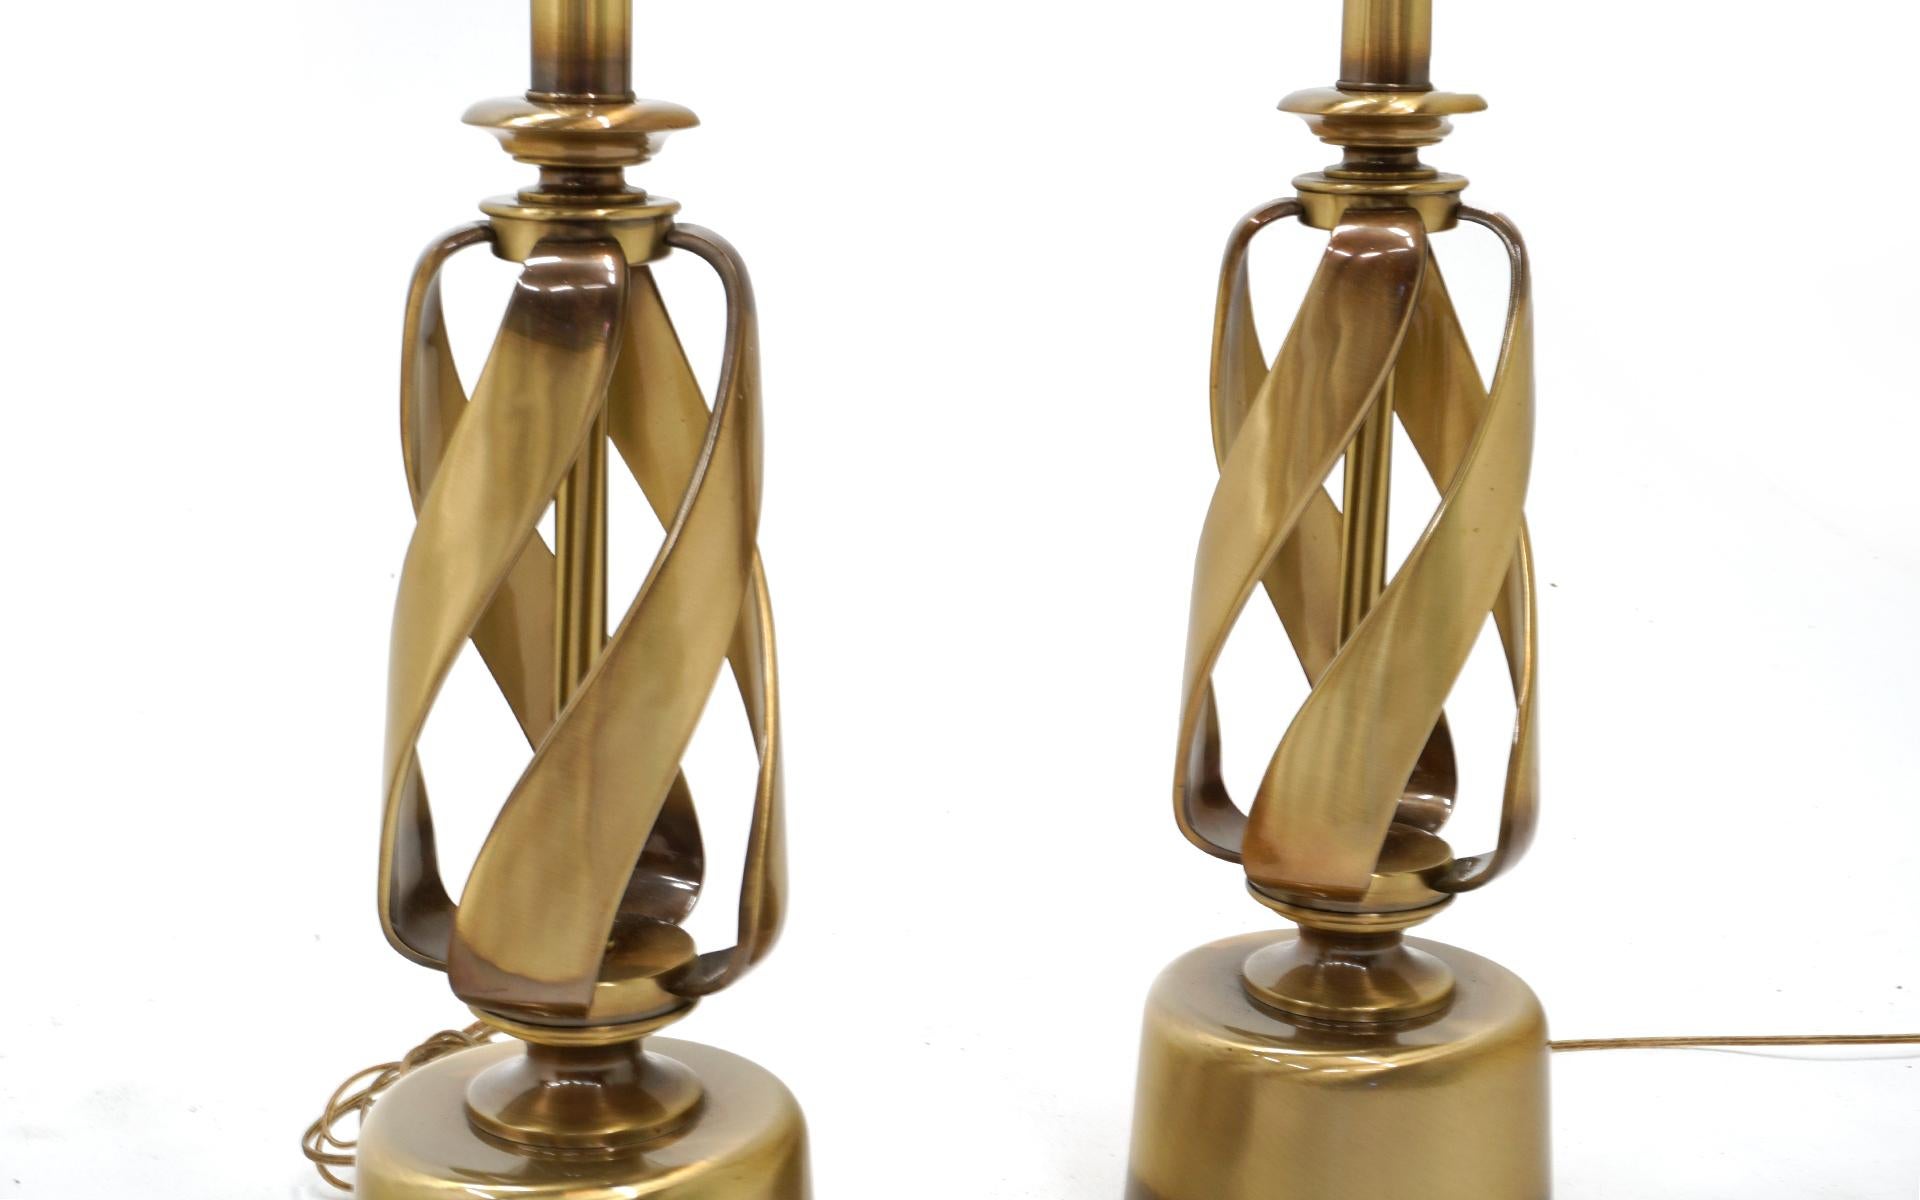 Pair of brass table lamps with the original globes. Very good to excellent condition.